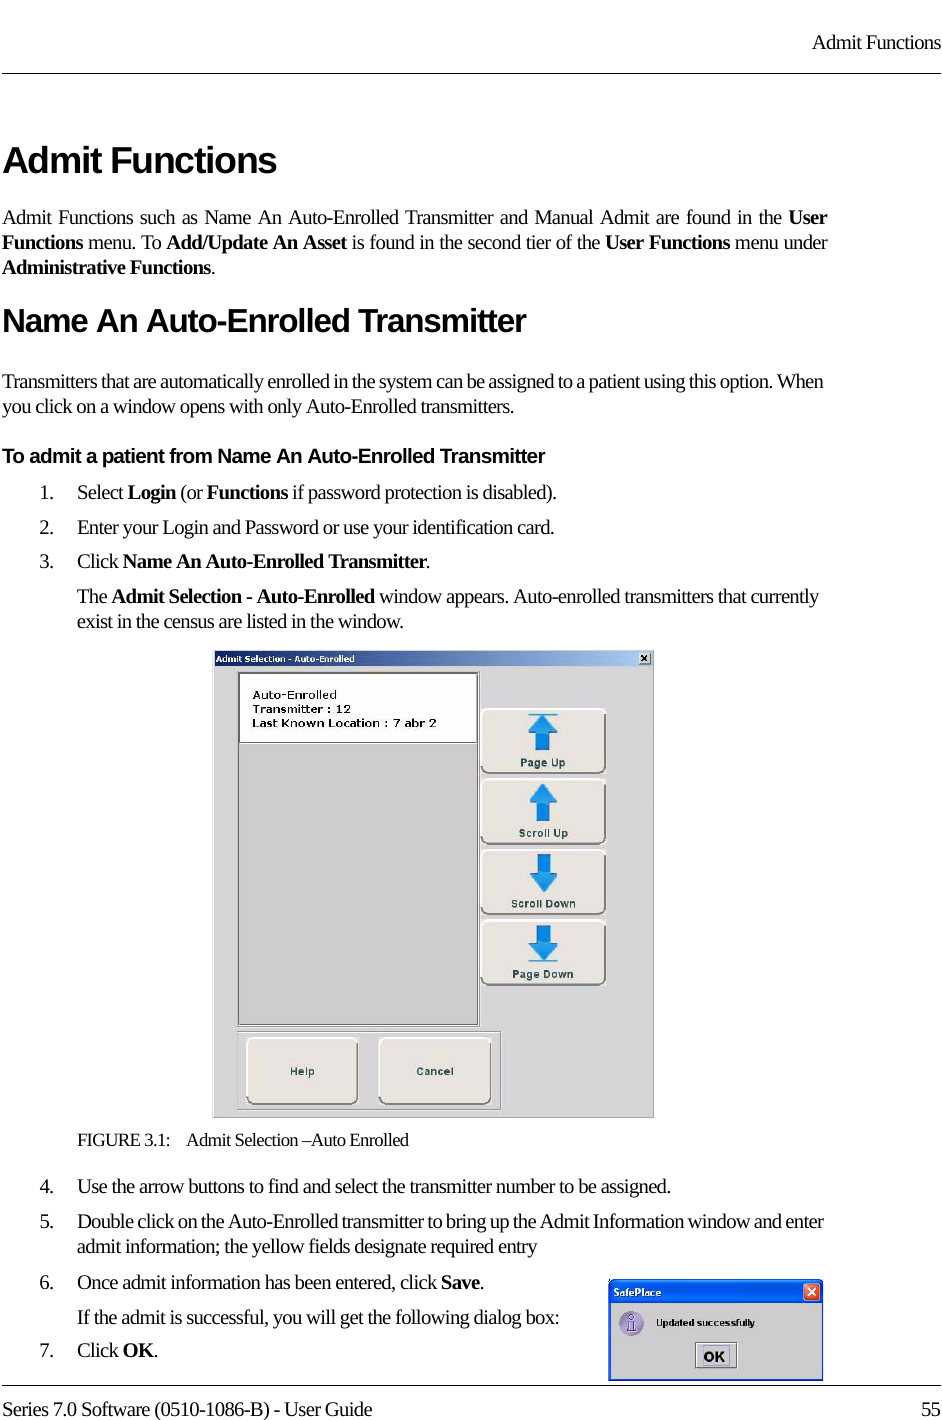 Series 7.0 Software (0510-1086-B) - User Guide  55Admit FunctionsAdmit FunctionsAdmit Functions such as Name An Auto-Enrolled Transmitter and Manual Admit are found in the User Functions menu. To Add/Update An Asset is found in the second tier of the User Functions menu underAdministrative Functions.Name An Auto-Enrolled TransmitterTransmitters that are automatically enrolled in the system can be assigned to a patient using this option. When you click on a window opens with only Auto-Enrolled transmitters.To admit a patient from Name An Auto-Enrolled Transmitter1.    Select Login (or Functions if password protection is disabled).2.    Enter your Login and Password or use your identification card. 3.    Click Name An Auto-Enrolled Transmitter. The Admit Selection - Auto-Enrolled window appears. Auto-enrolled transmitters that currently exist in the census are listed in the window.FIGURE 3.1:    Admit Selection –Auto Enrolled4.    Use the arrow buttons to find and select the transmitter number to be assigned. 5.    Double click on the Auto-Enrolled transmitter to bring up the Admit Information window and enter admit information; the yellow fields designate required entry 6.    Once admit information has been entered, click Save.If the admit is successful, you will get the following dialog box:7.    Click OK. 